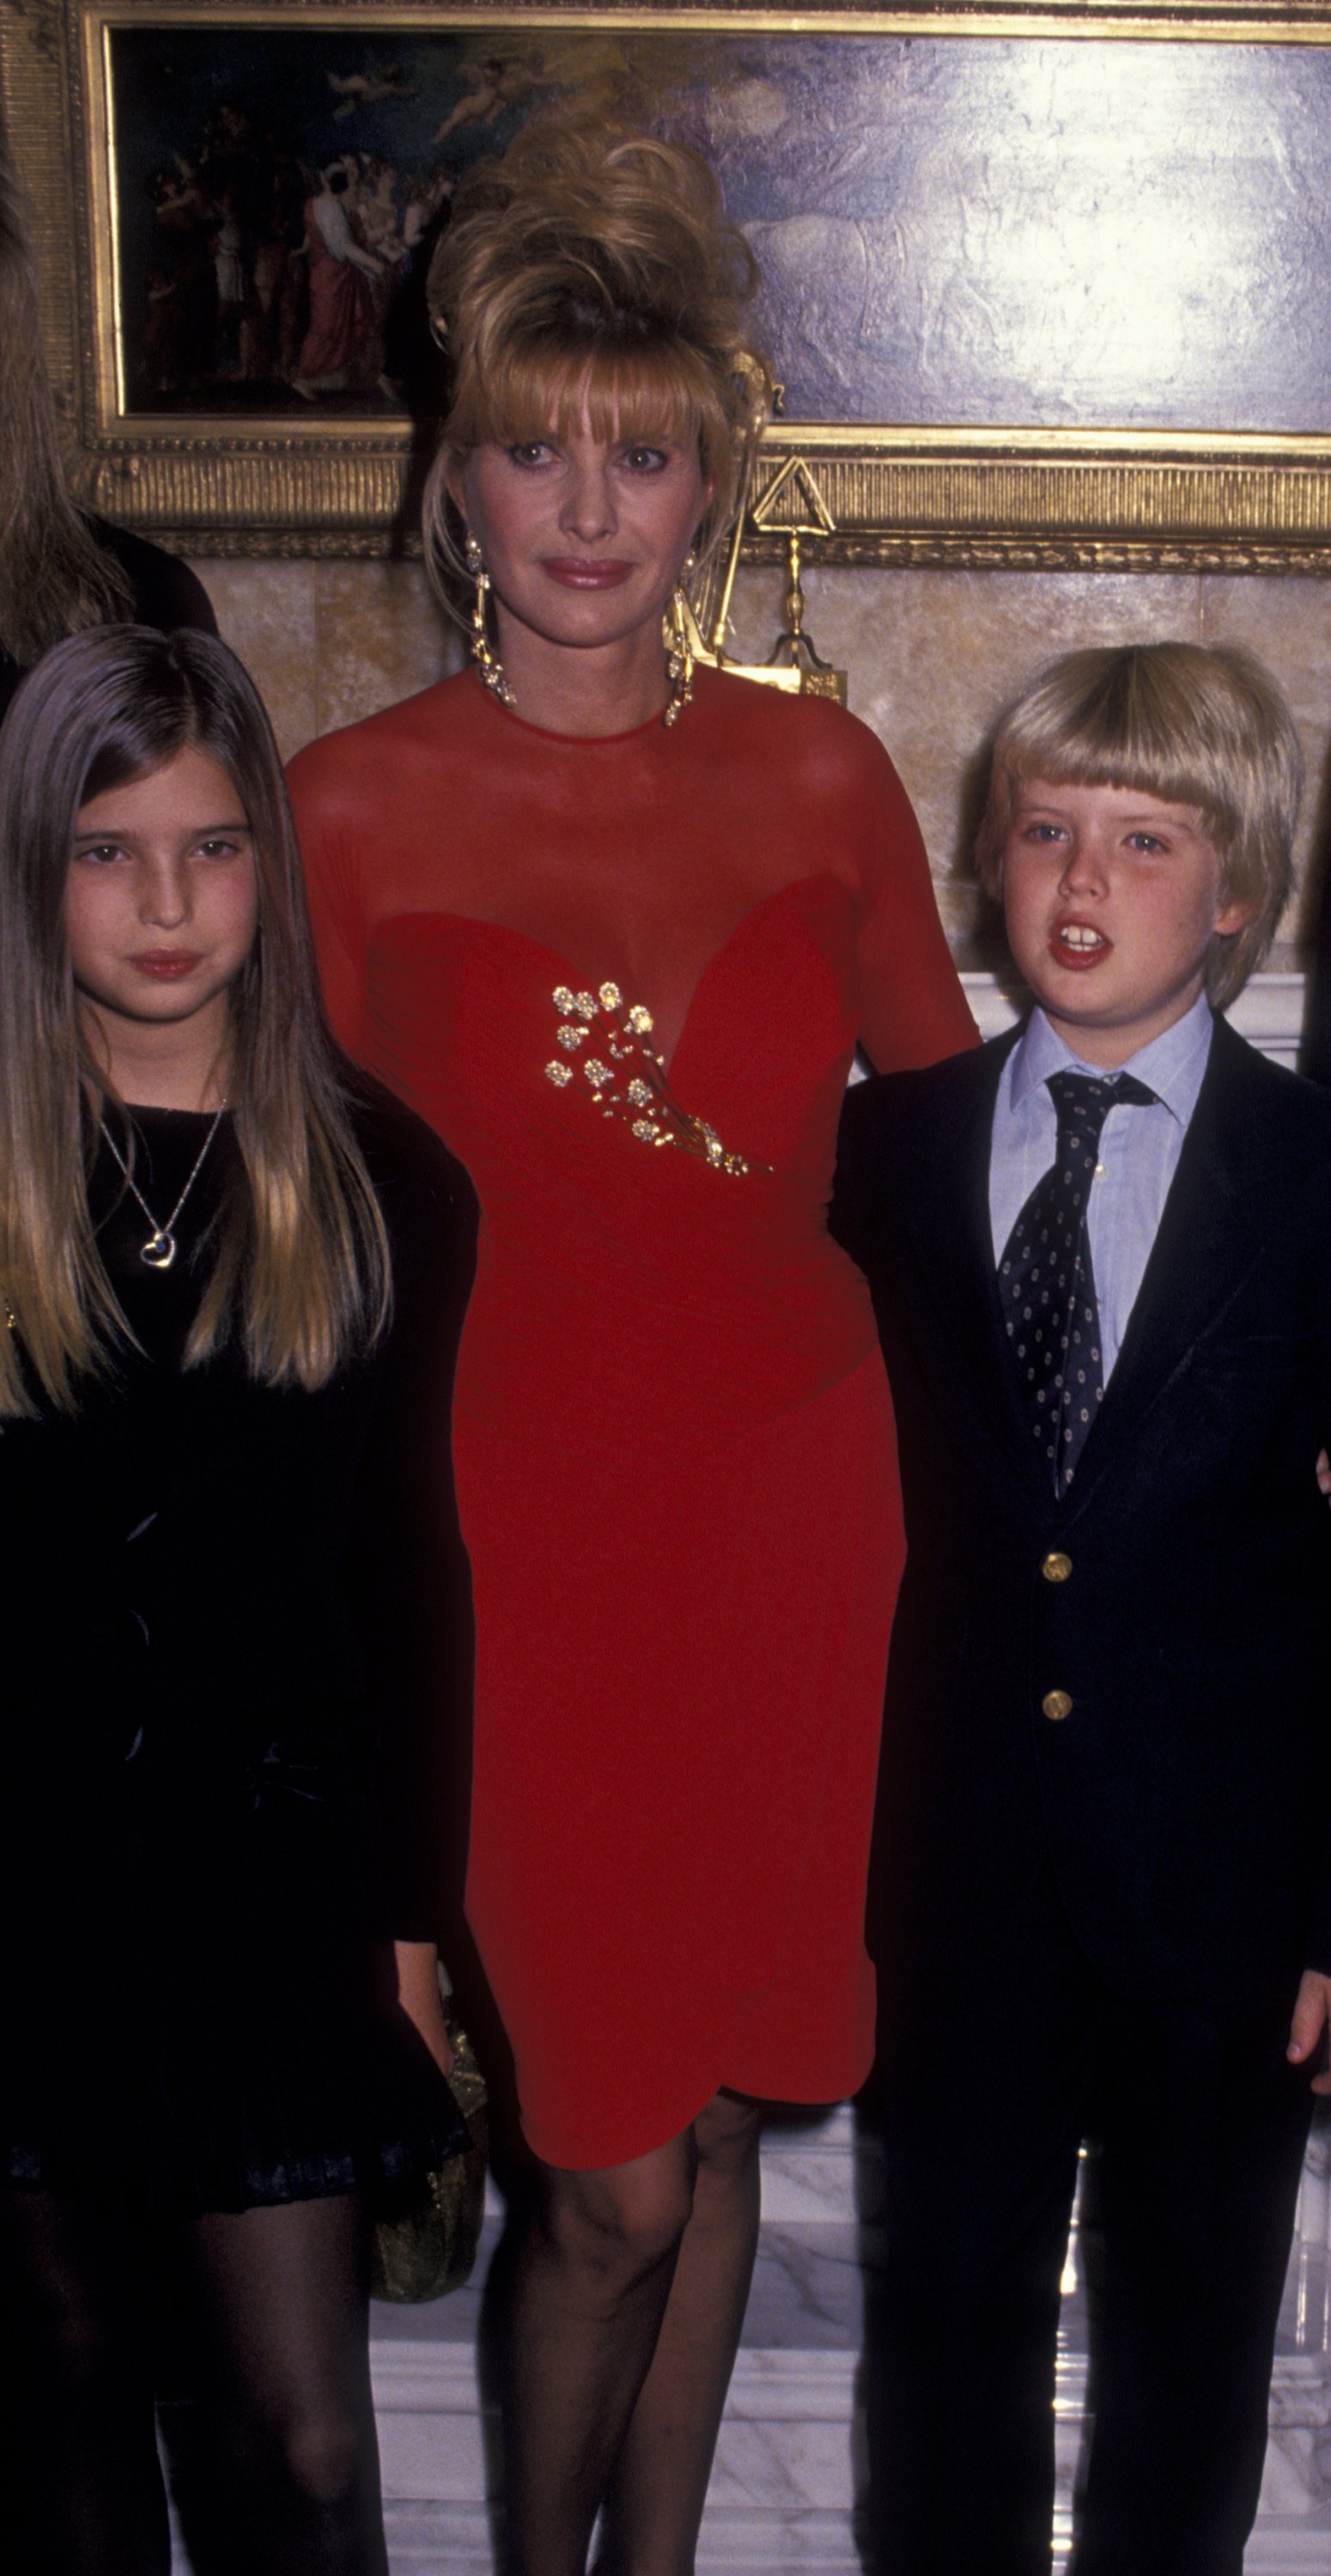     Ivanka Trump, Ivana Trump and Eric Trump attend A Novel Affair fundraising gala on October 25, 1993 at Trump Tower in New York City.  |  Source: Getty Images